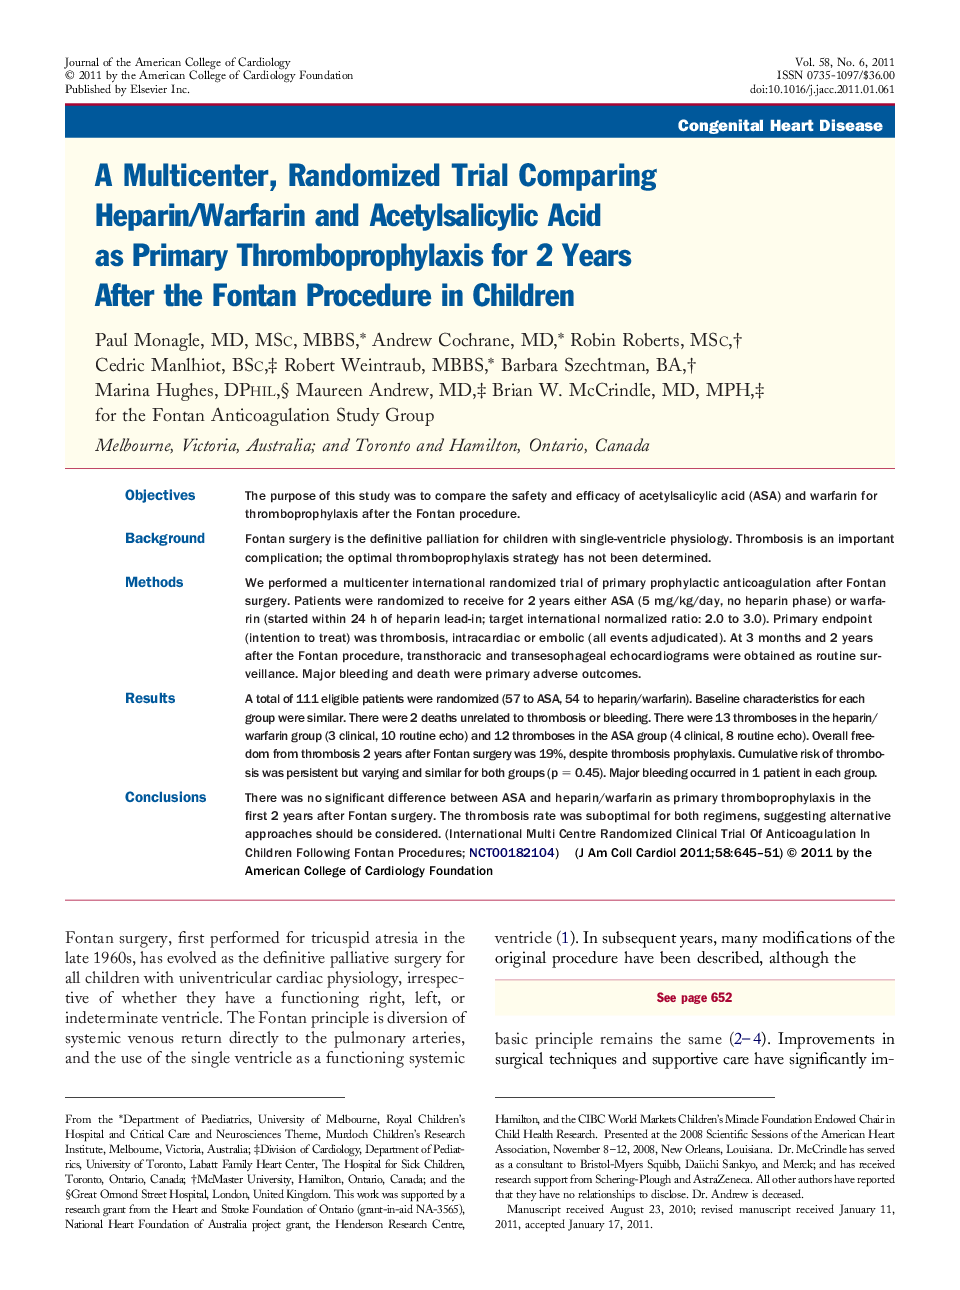 A Multicenter, Randomized Trial Comparing Heparin/Warfarin and Acetylsalicylic Acid as Primary Thromboprophylaxis for 2 Years After the Fontan Procedure in Children 